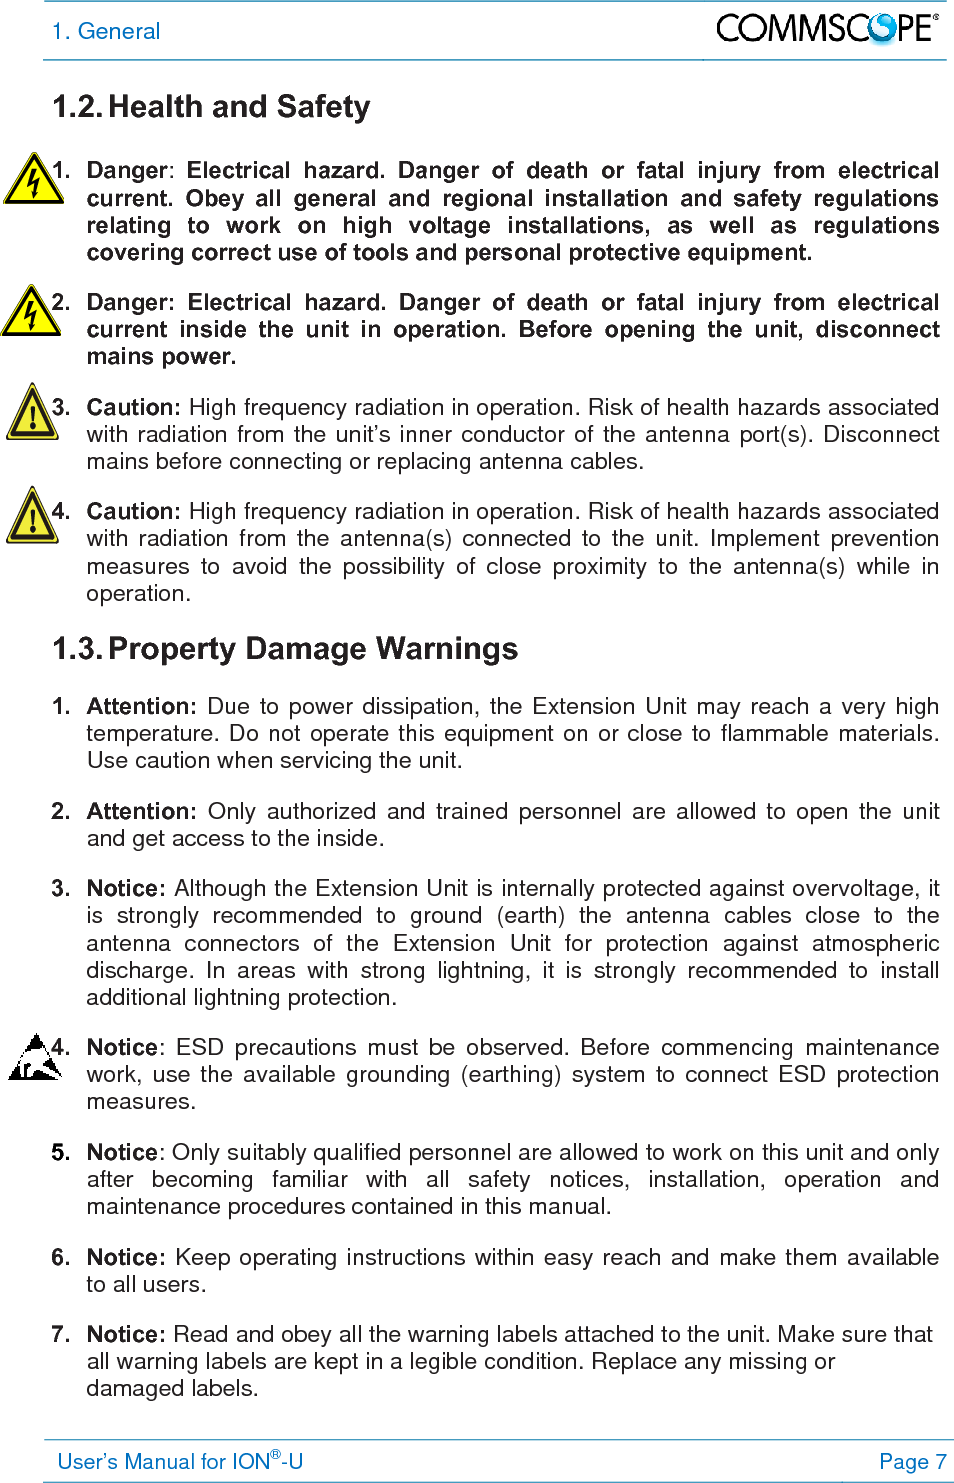 1. General   User’s Manual for ION®-U Page 7 1.2. Health and Safety  1. Danger:  Electrical hazard. Danger of death or fatal injury from electrical current. Obey all general and regional installation and safety regulations relating to work on high voltage installations, as well as regulations covering correct use of tools and personal protective equipment. 2.  Danger: Electrical hazard. Danger of death or fatal injury from electrical current inside the unit in operation. Before opening the unit, disconnect mains power. 3. Caution: High frequency radiation in operation. Risk of health hazards associated with radiation from the unit’s inner conductor of the antenna port(s). Disconnect mains before connecting or replacing antenna cables. 4. Caution: High frequency radiation in operation. Risk of health hazards associated with radiation from the antenna(s) connected to the unit. Implement prevention measures to avoid the possibility of close proximity to the antenna(s) while in operation. 1.3. Property  Damage  Warnings  1. Attention: Due to power dissipation, the Extension Unit may reach a very high temperature. Do not operate this equipment on or close to flammable materials. Use caution when servicing the unit. 2. Attention: Only authorized and trained personnel are allowed to open the unit and get access to the inside. 3. Notice: Although the Extension Unit is internally protected against overvoltage, it is strongly recommended to ground (earth) the antenna cables close to the antenna connectors of the Extension Unit for protection against atmospheric discharge. In areas with strong lightning, it is strongly recommended to install additional lightning protection. 4. Notice: ESD precautions must be observed. Before commencing maintenance work, use the available grounding (earthing) system to connect ESD protection measures. 5.  Notice: Only suitably qualified personnel are allowed to work on this unit and only after becoming familiar with all safety notices, installation, operation and maintenance procedures contained in this manual. 6. Notice: Keep operating instructions within easy reach and make them available to all users. 7. Notice: Read and obey all the warning labels attached to the unit. Make sure that all warning labels are kept in a legible condition. Replace any missing or damaged labels. 